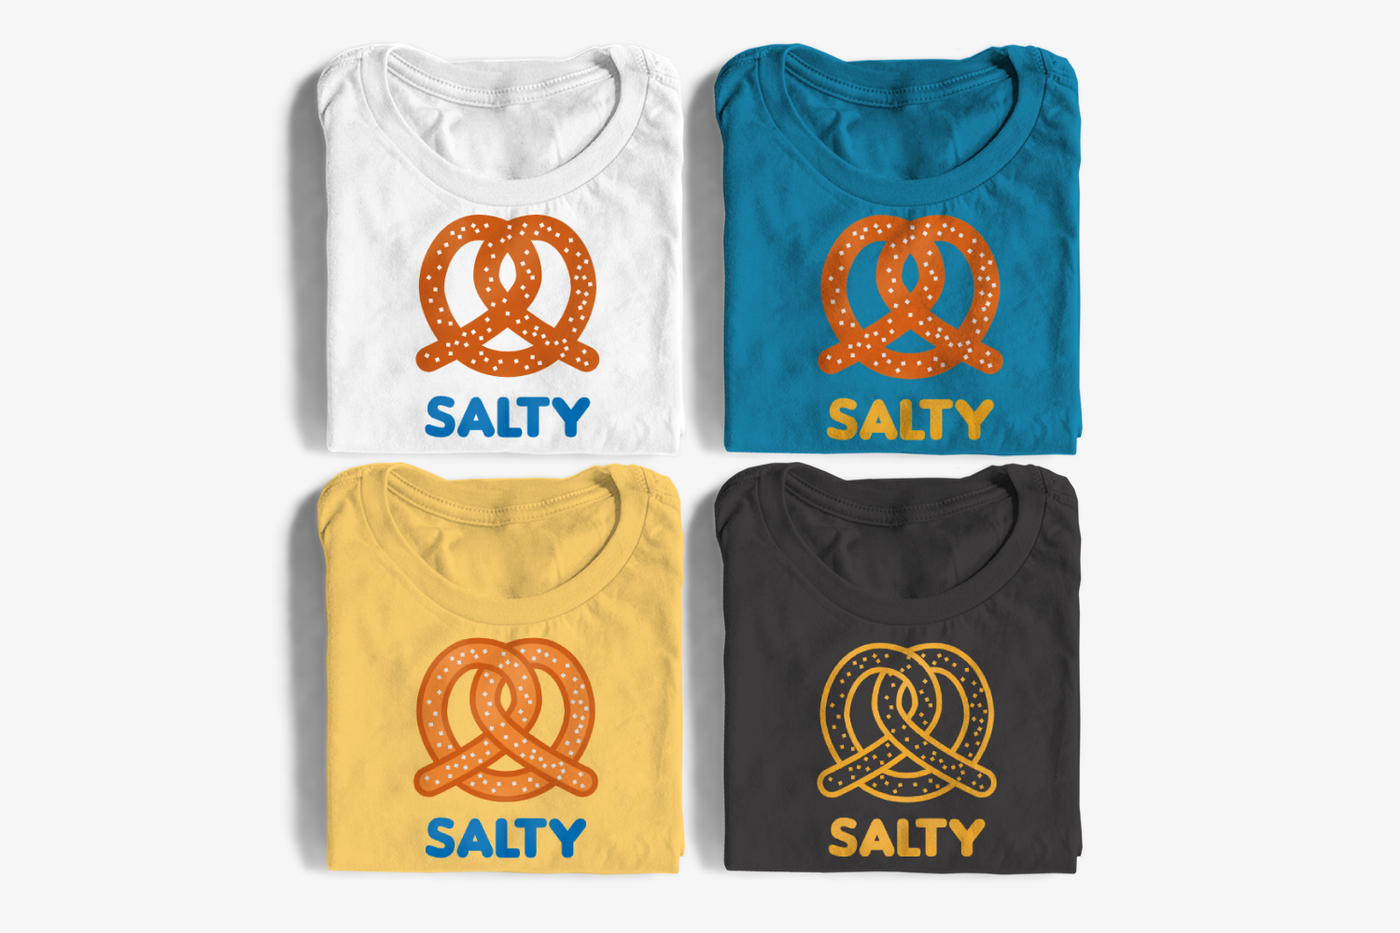 Pretzel design with the word "SALTY"